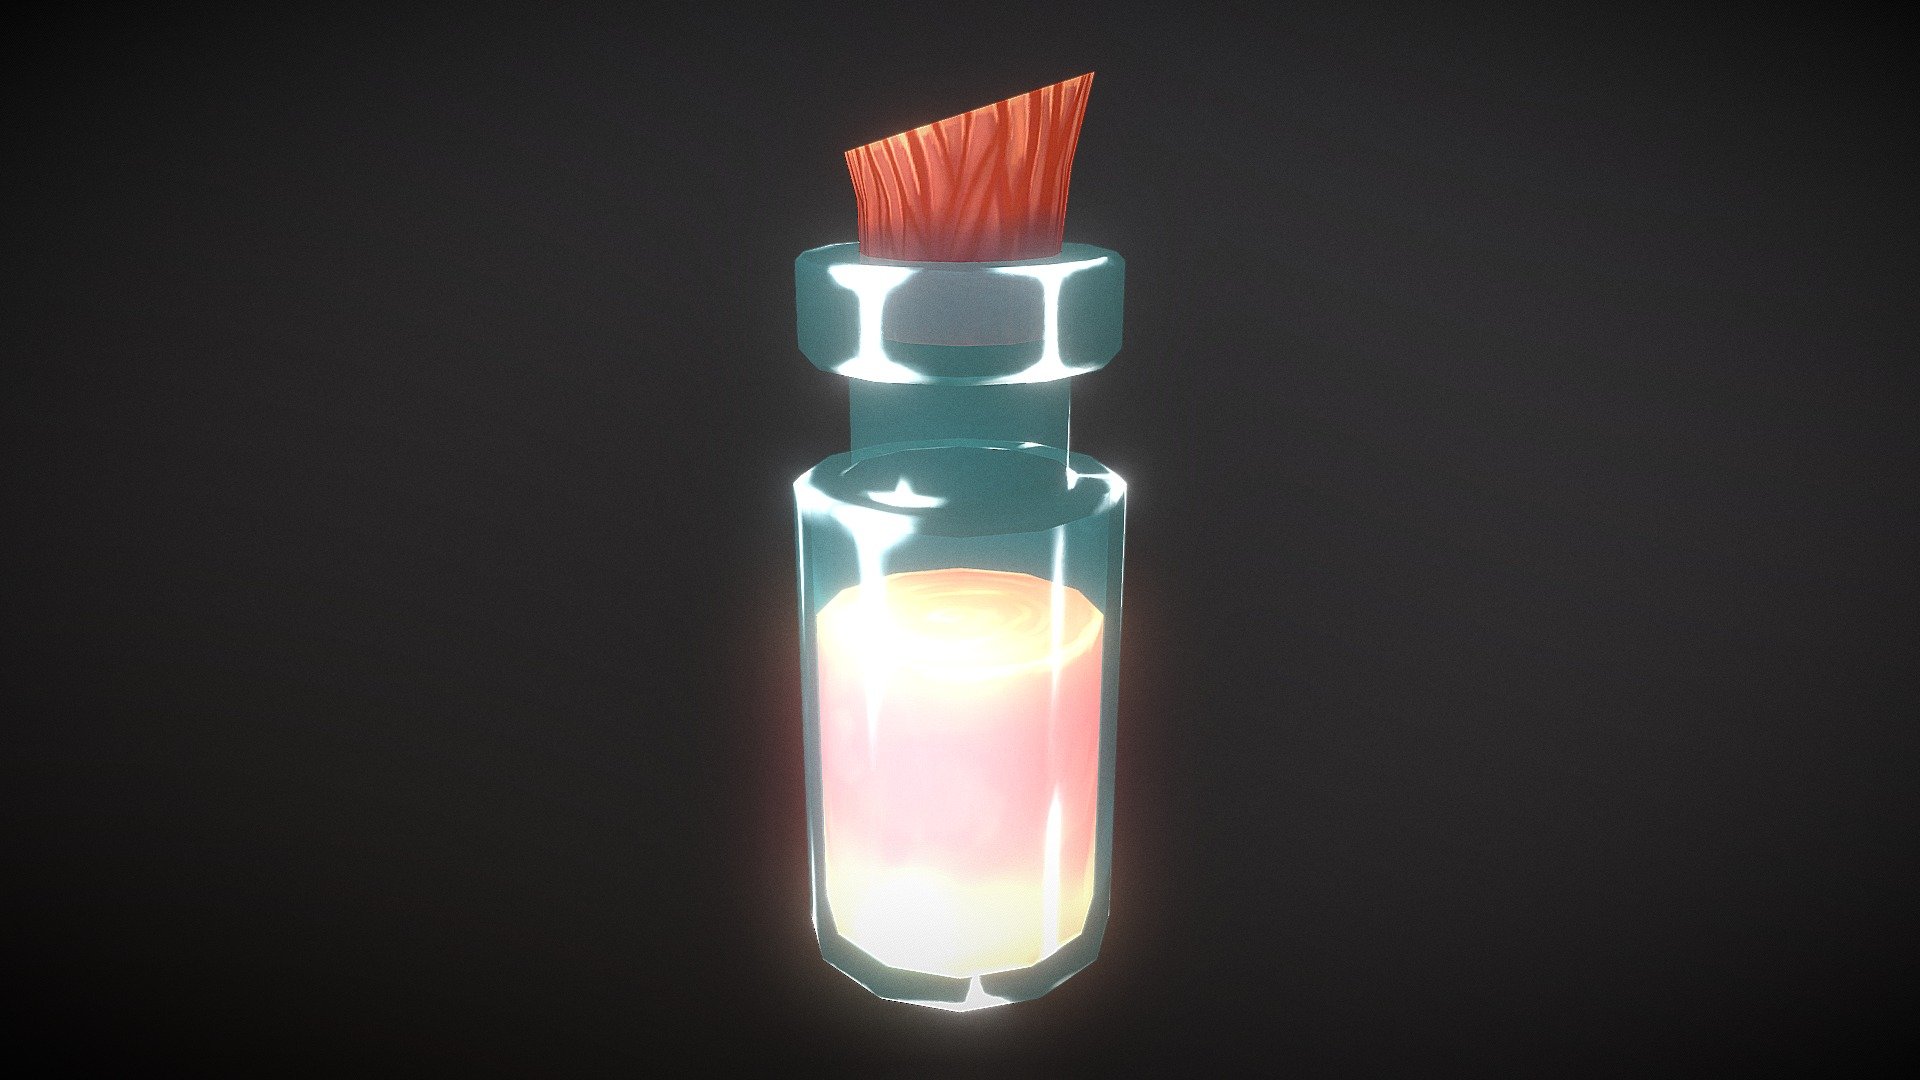 Magic Potion. This work is based on a concept art i found on pinterest. I used Blender for modeling and doing UVs, 3DCoat and Photoshop for texturing. Thanks and have a great day 3d model